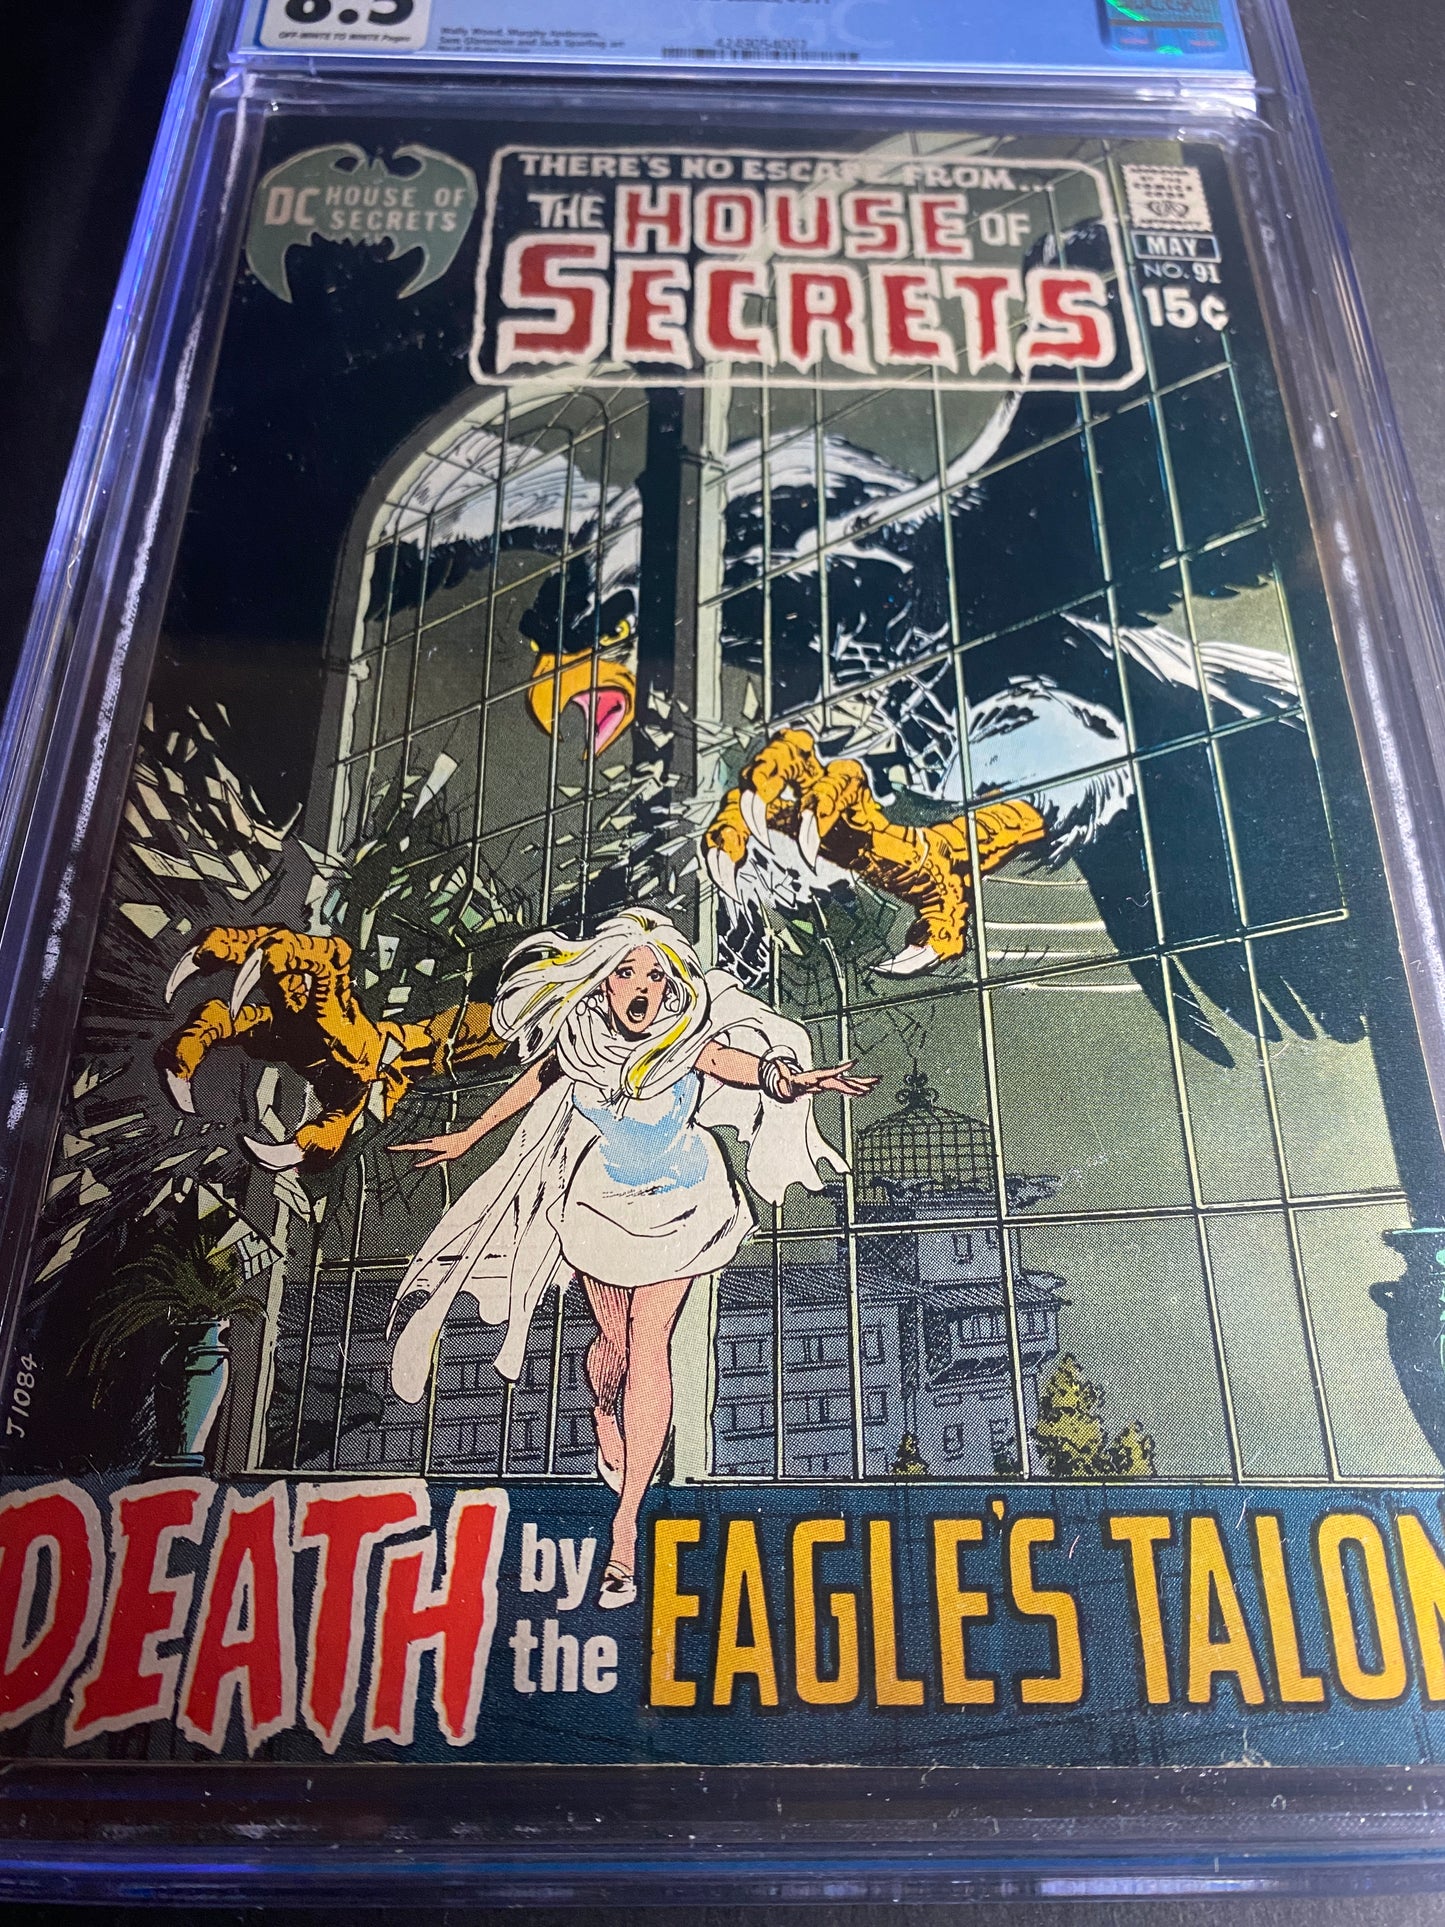 The House of Secrets #91 CGC 8.5 | Neal Adams Cover Art | Bronze Age DC Horror